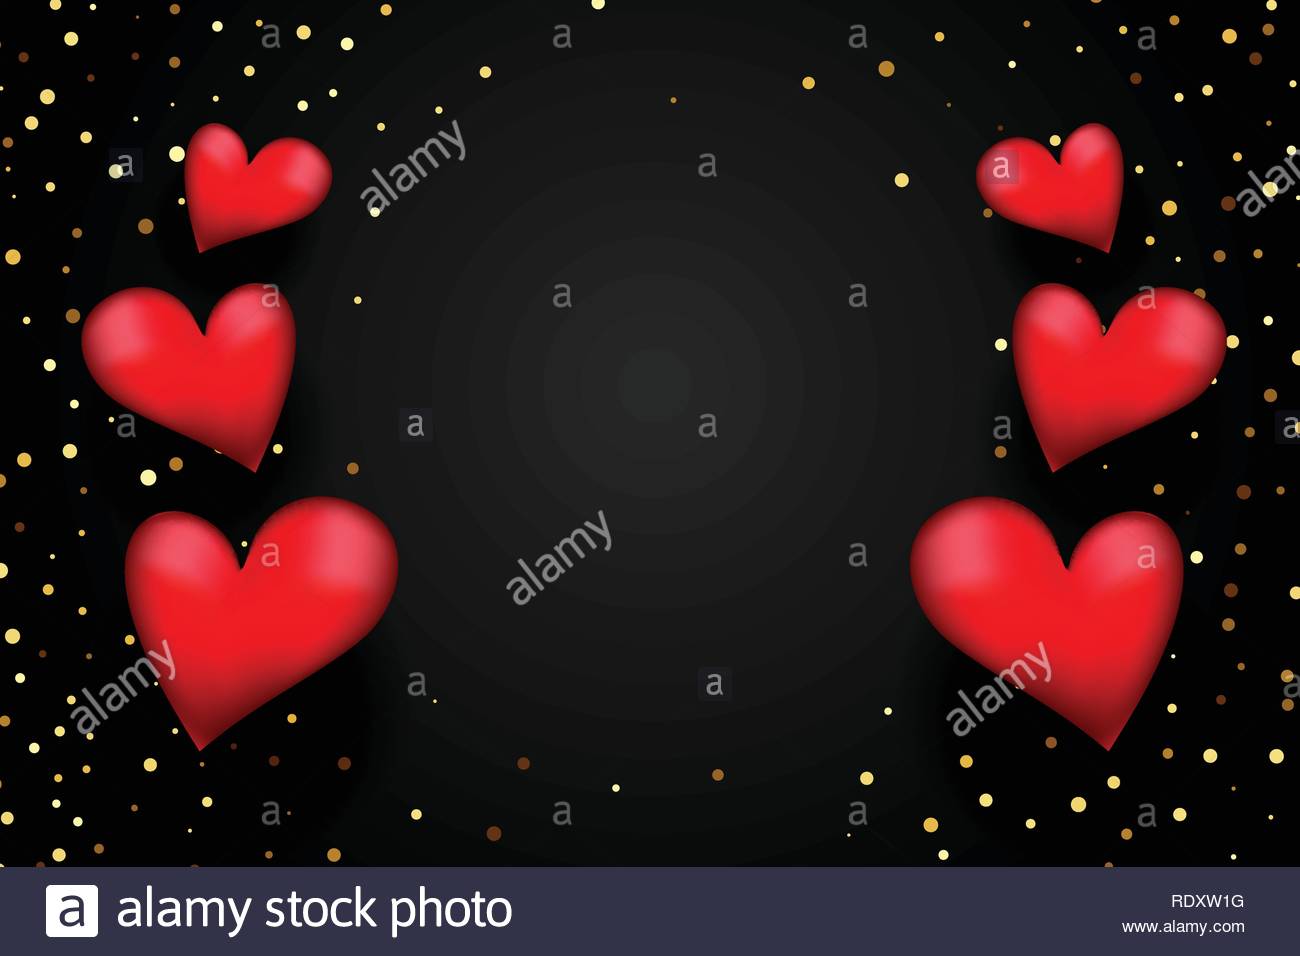 Red 3d Hearts With Golden Confetti On Black Background With Text